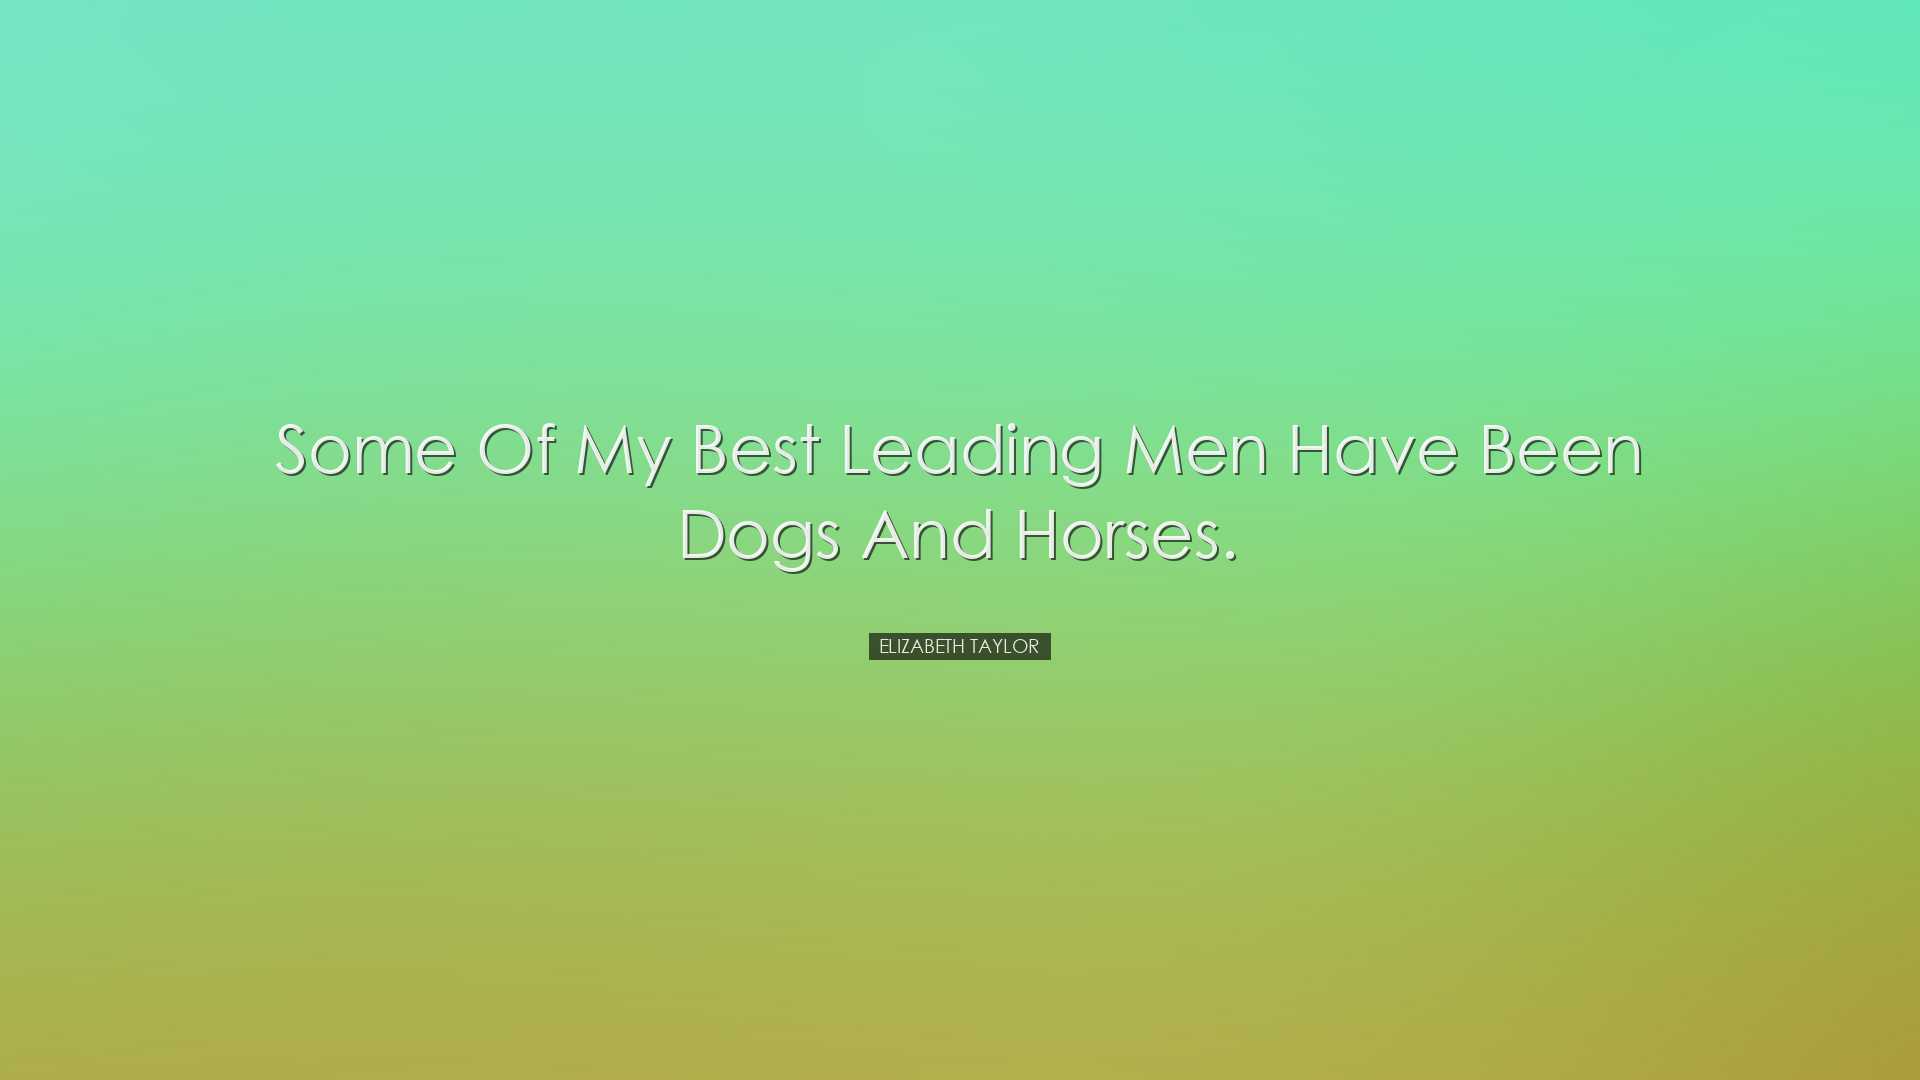 Some of my best leading men have been dogs and horses. - Elizabeth